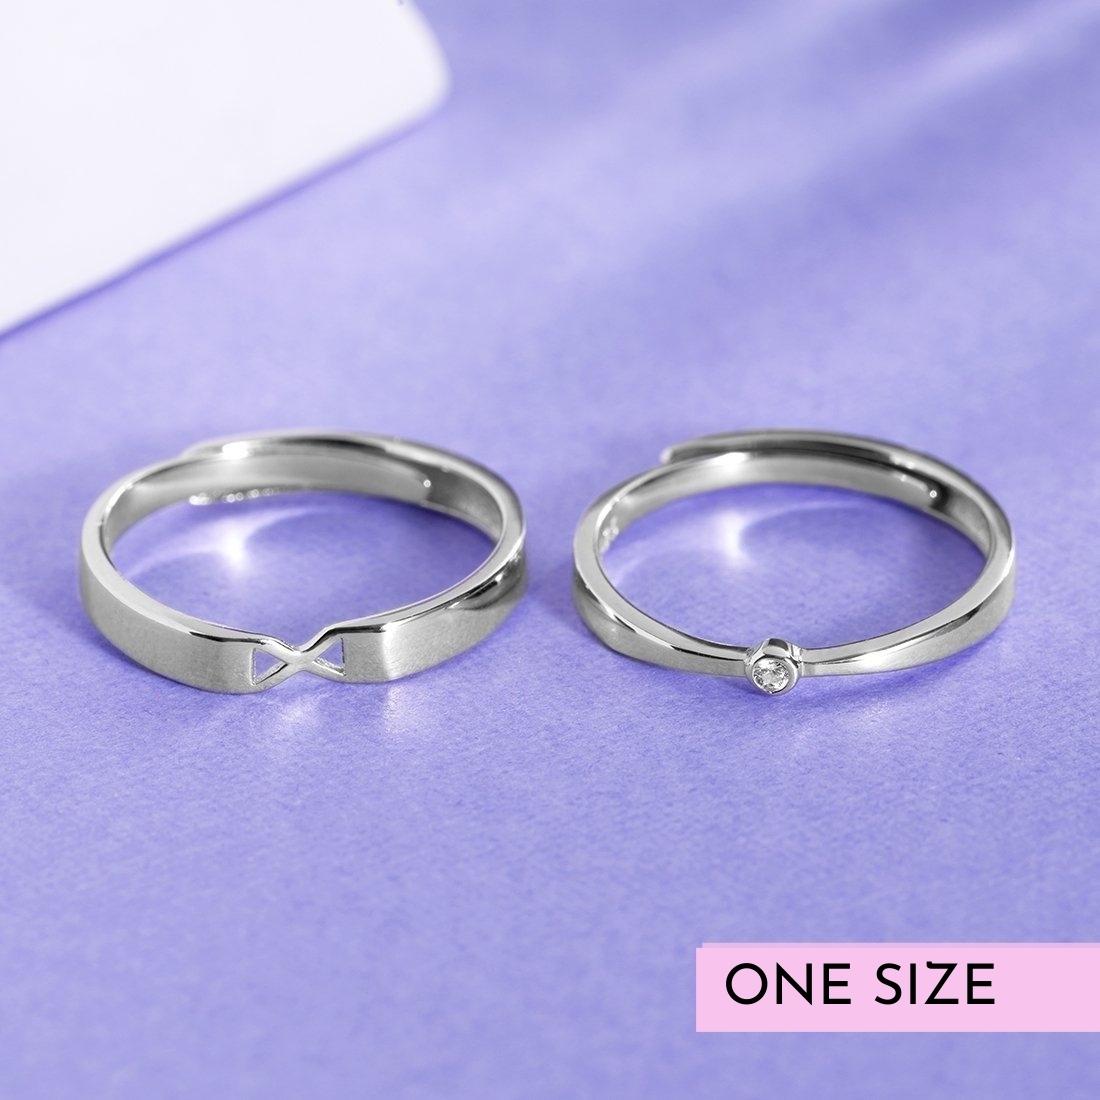 Dsnyu Couple Rings, Silver Stainless Steel Ring, Brothers Unique Matching  Wedding Bands for Birthday Comfort Fit Size 5|Amazon.com